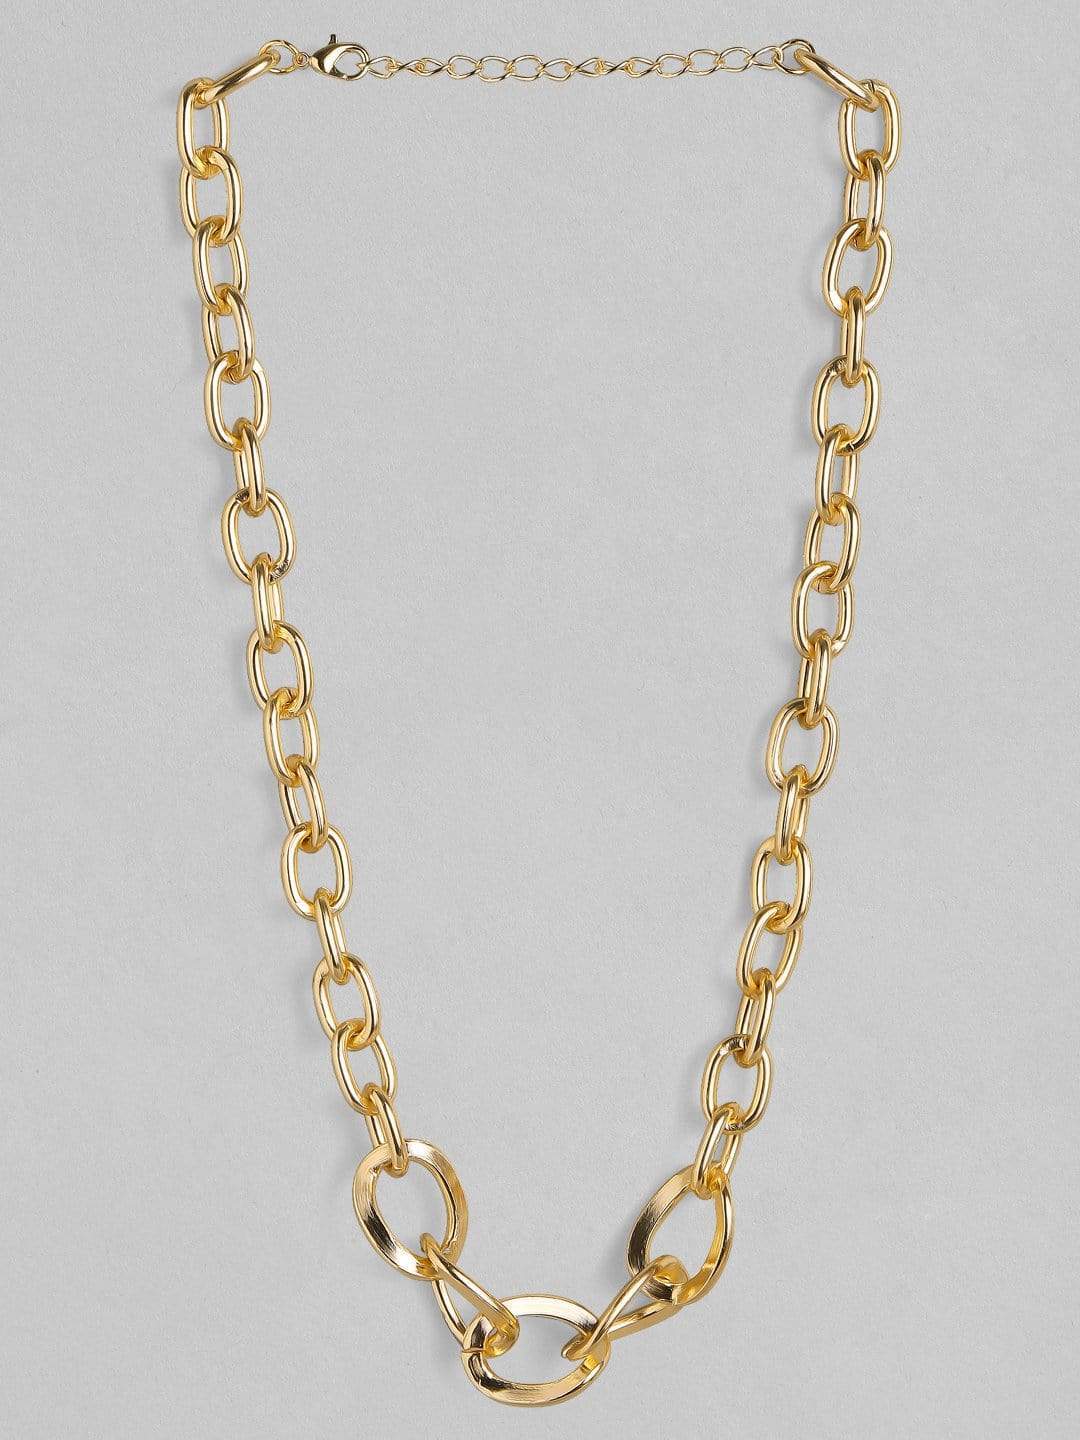 Set of 2 Necklaces- Gold Plated Layered and Round Pendant, Gold Plated Interlink Chain & Necklaces